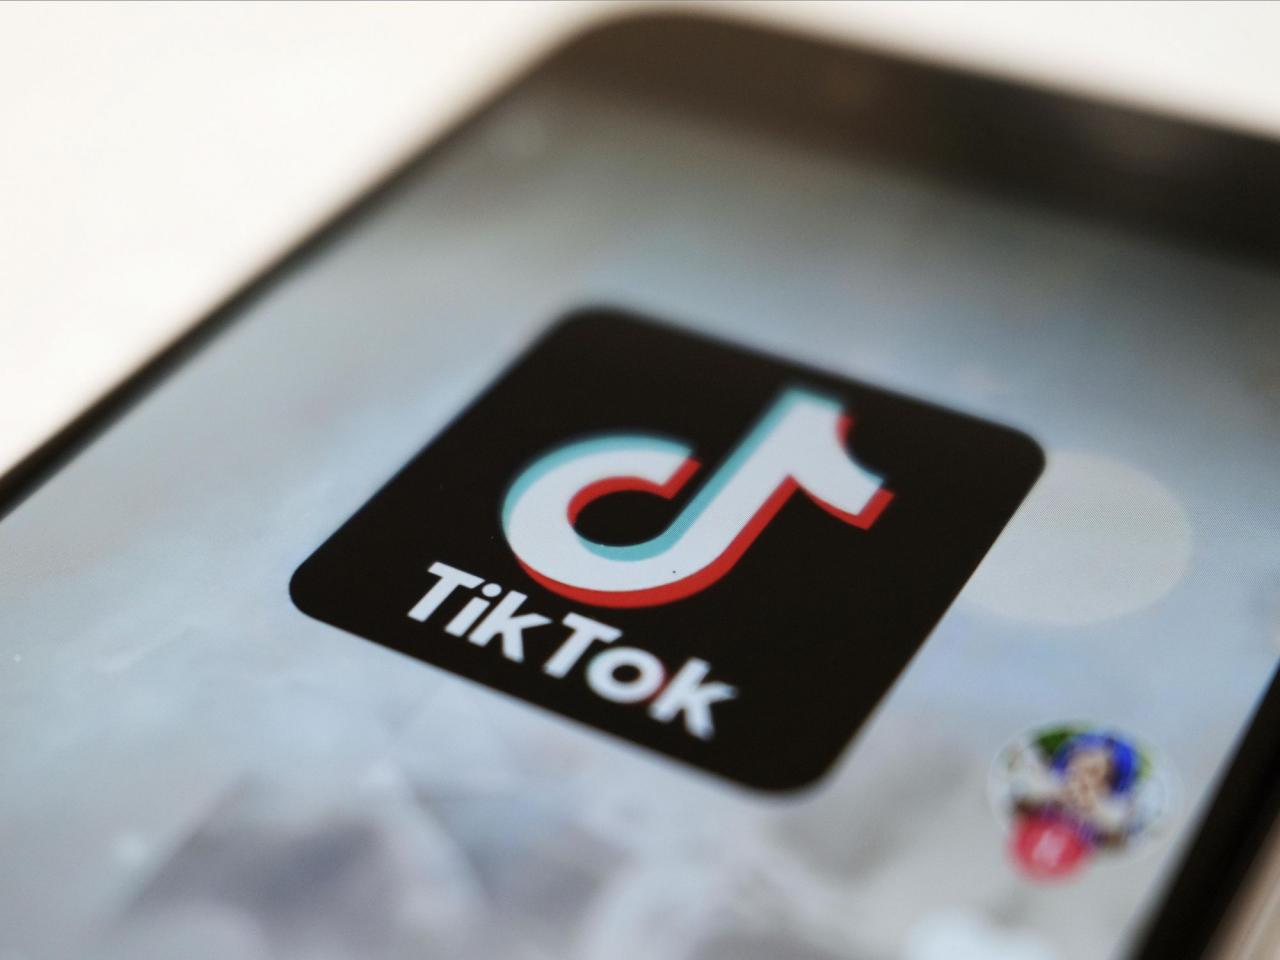 TikTok content creators sue the US government over law that could ban the popular platform